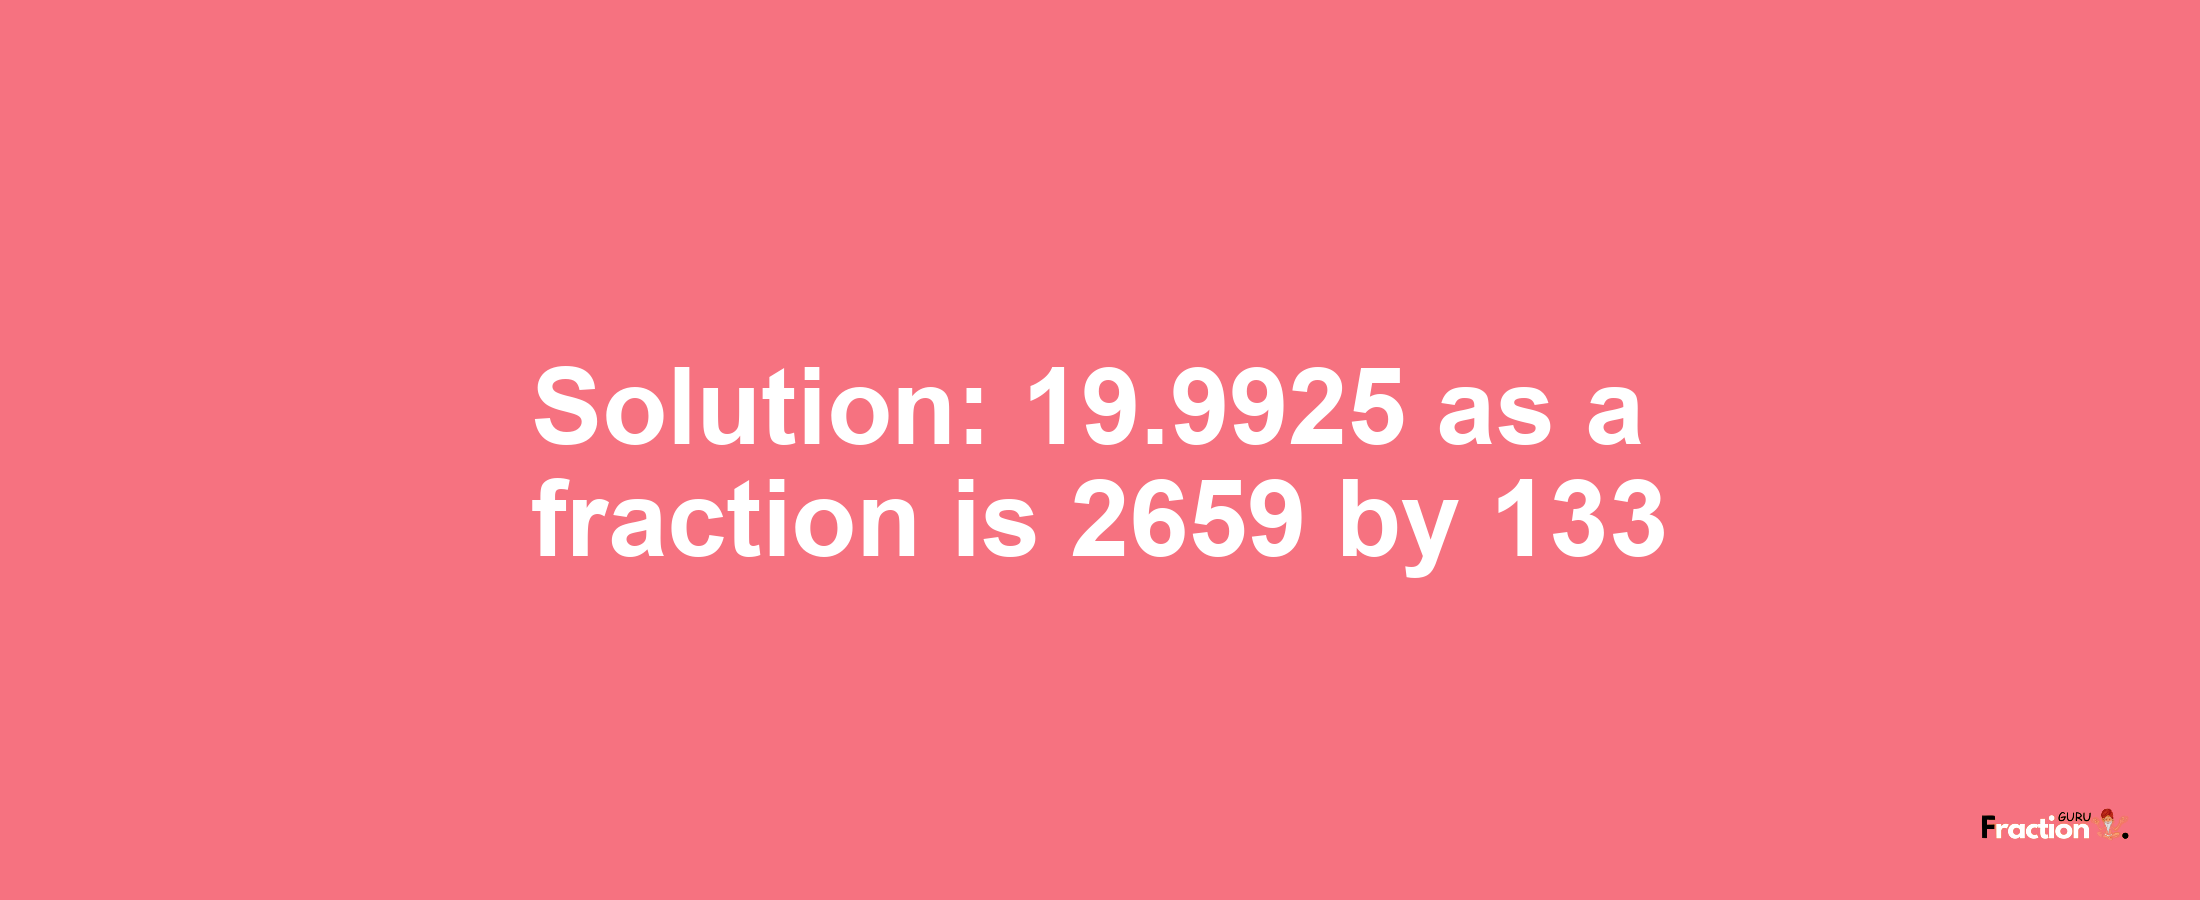 Solution:19.9925 as a fraction is 2659/133